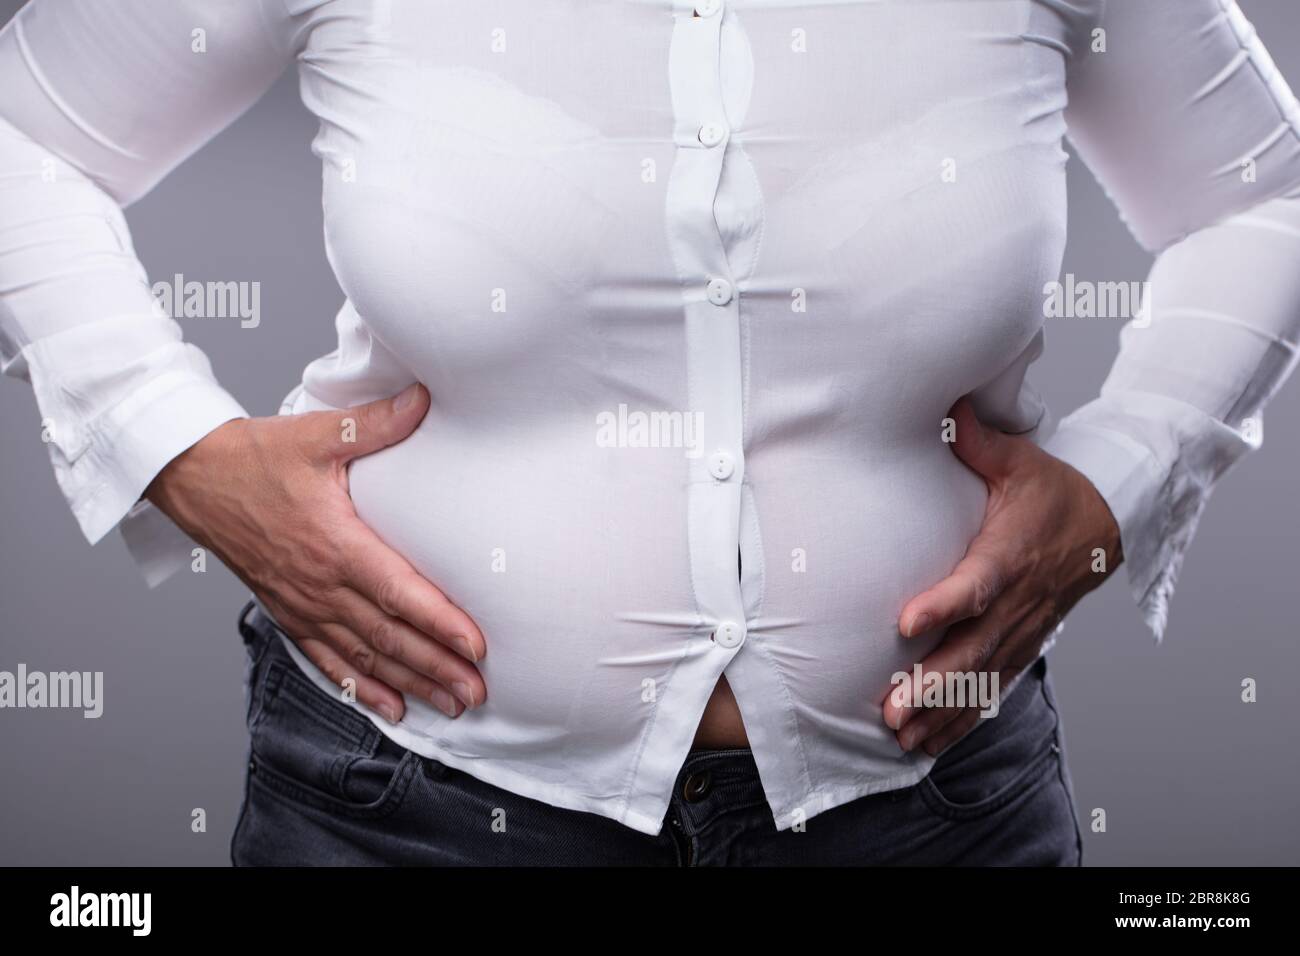 Mid Section Of Fat Woman With Shirt Too Small Touching Her Belly Against Grey Background Stock Photo